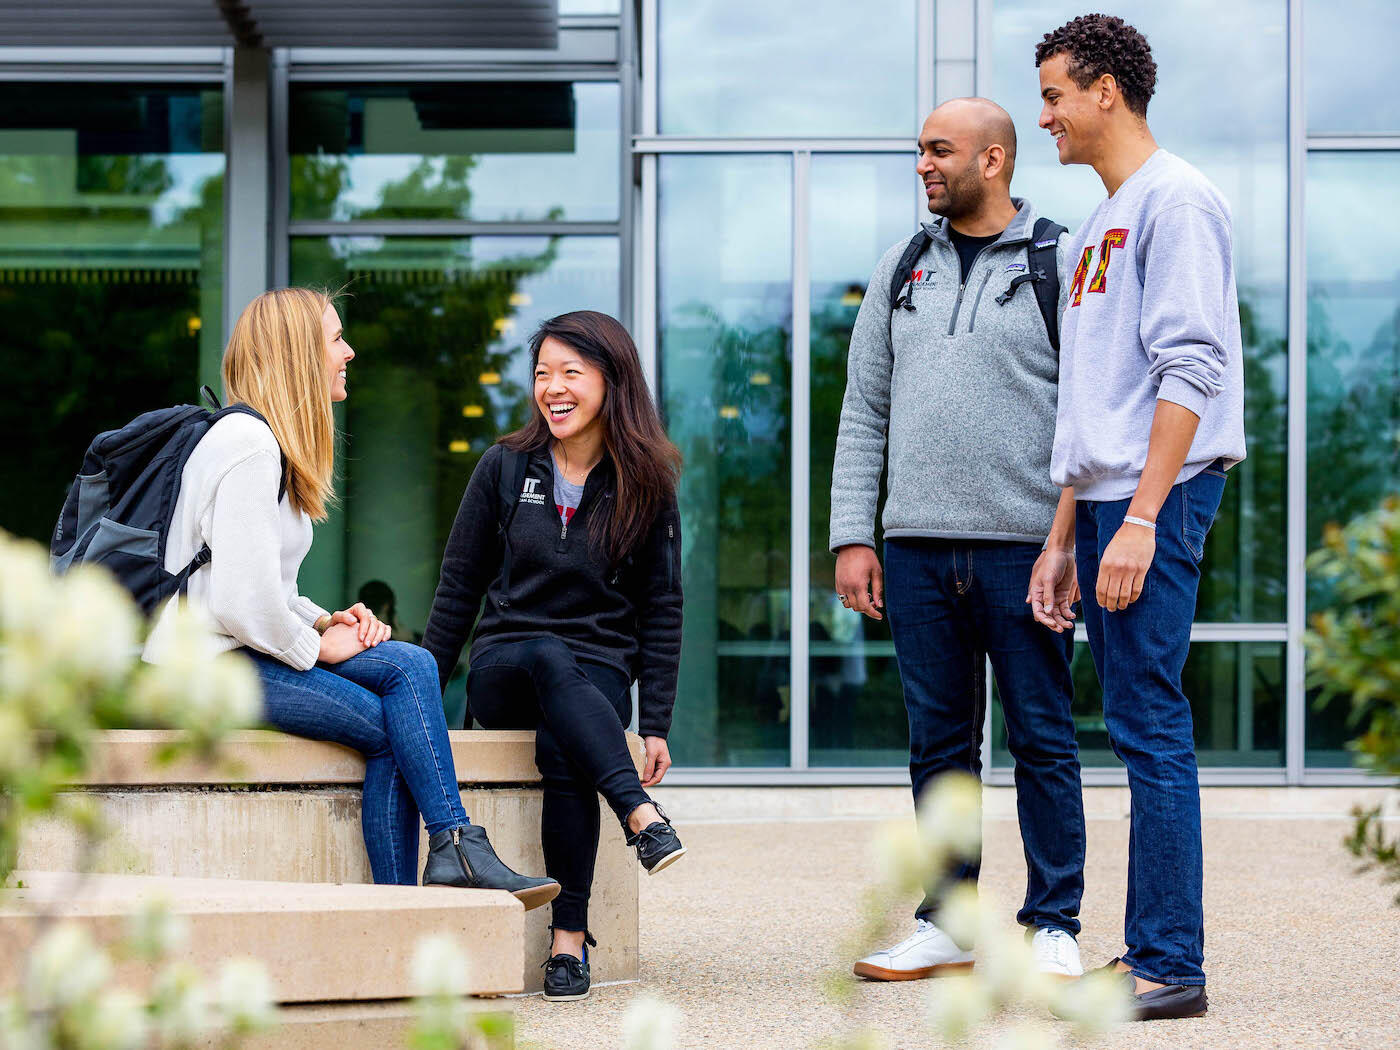 MBA students on campus 2019